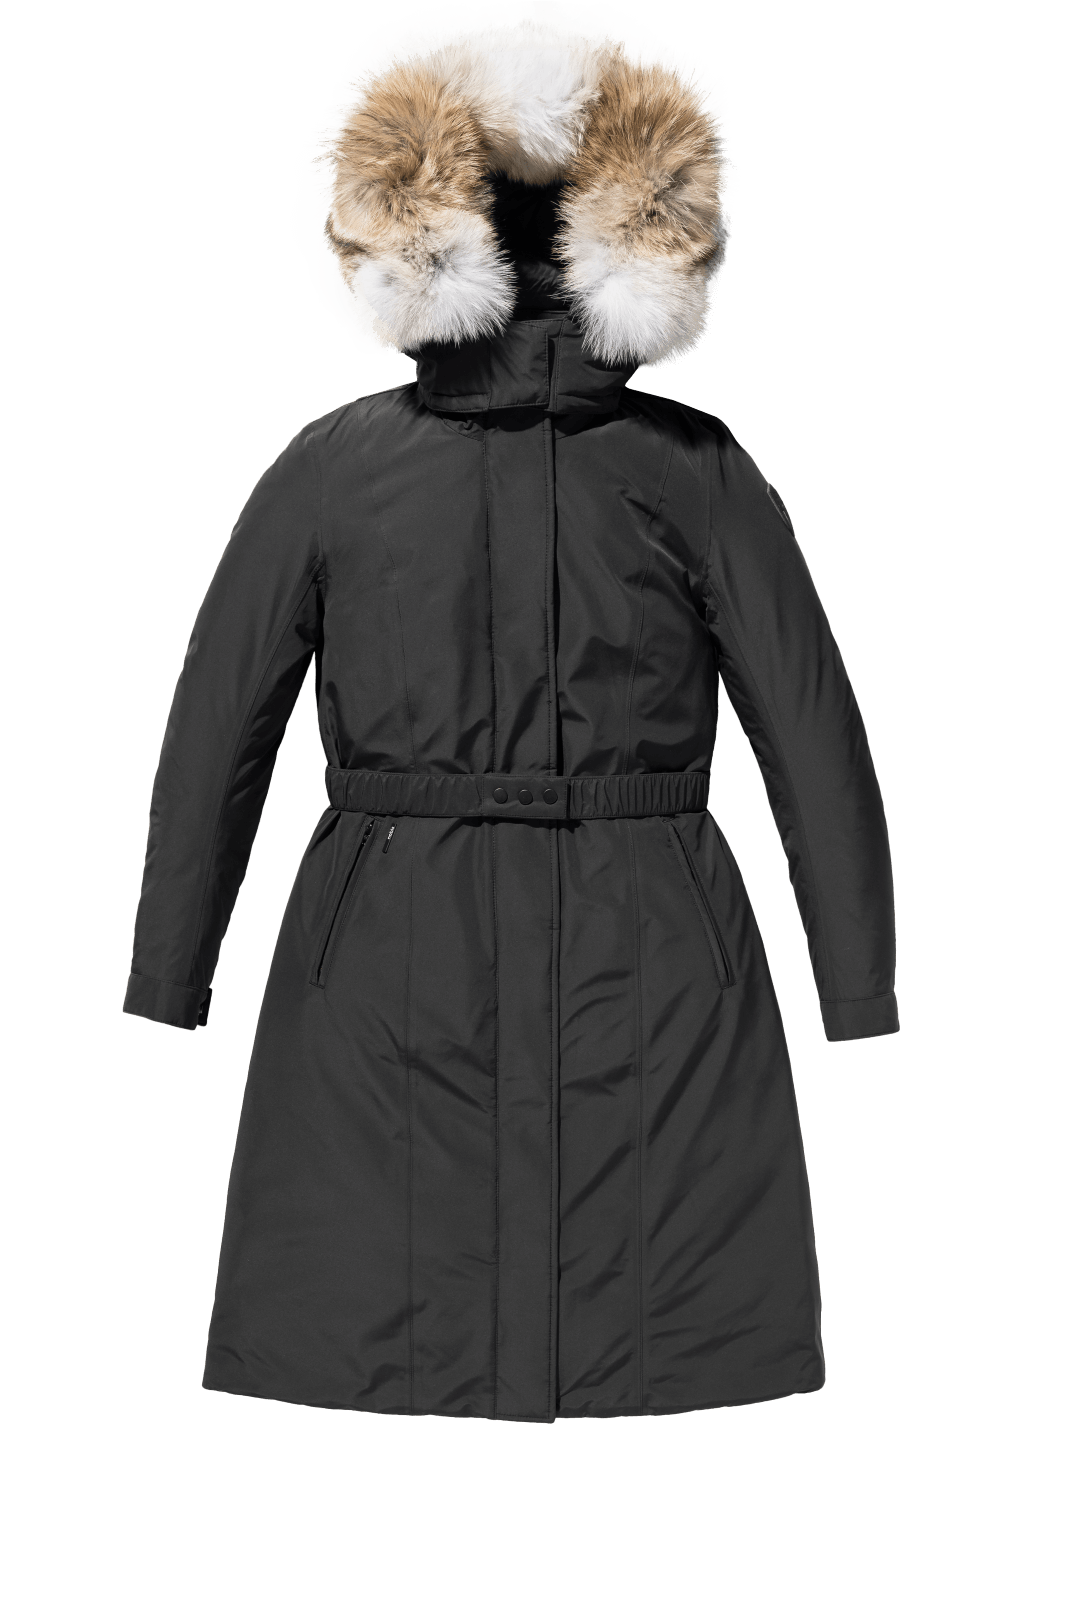 Celest Ladies Duster Parka in knee length, Canadian duck down insulation, removable hood and coyote fur trim, with adjustable belt, in Black